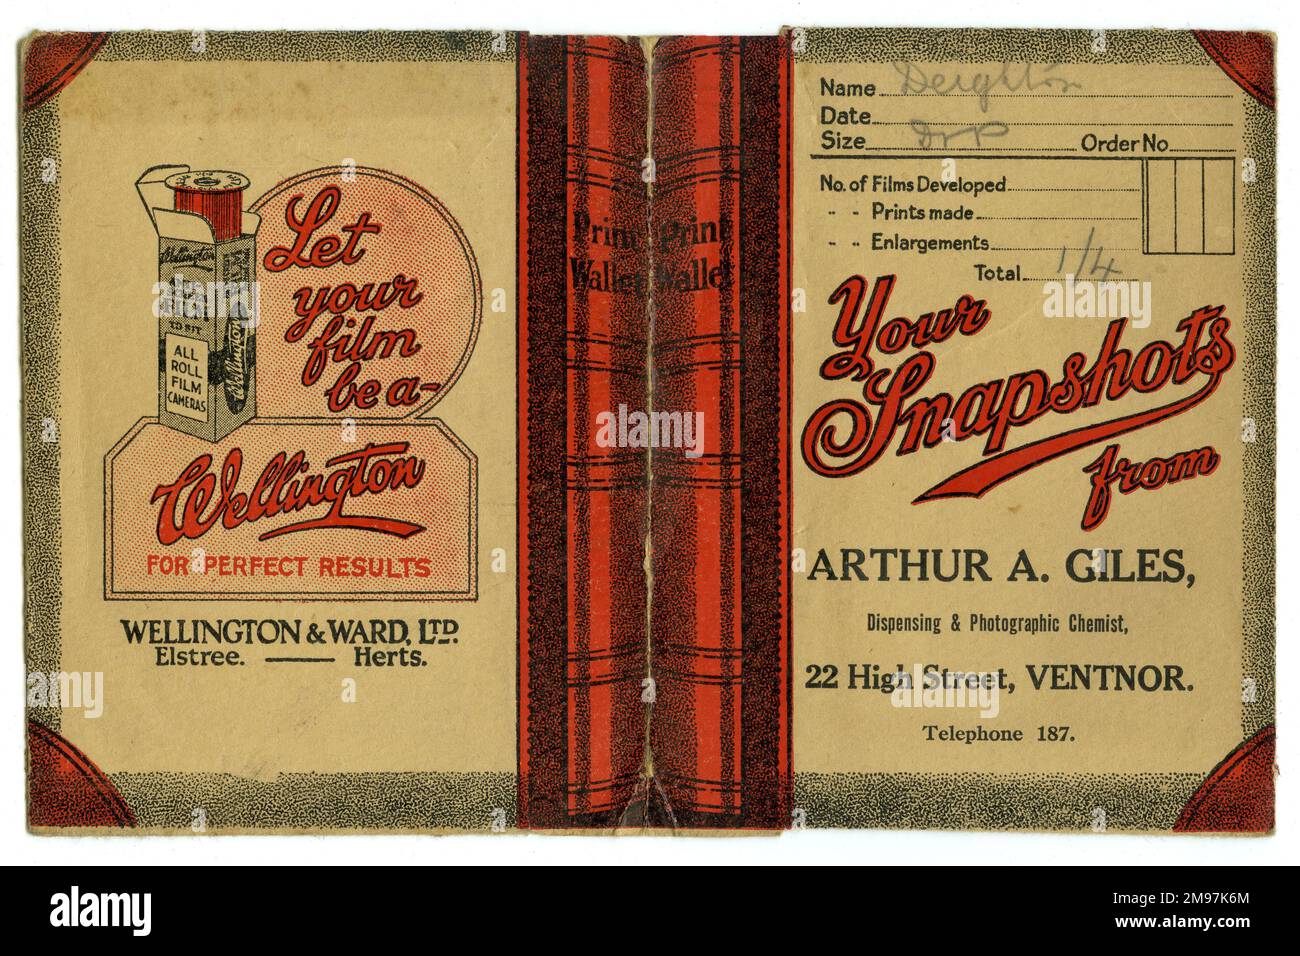 Photographic print wallet, advertising film from Wellington & Ward Ltd of Elstree, Hertfordshire. Photographs developed by Arthur A Giles, High Street, Ventnor, Isle of Wight. The customer's name is Deighton and the cost of developing is one shilling and fourpence. Stock Photo